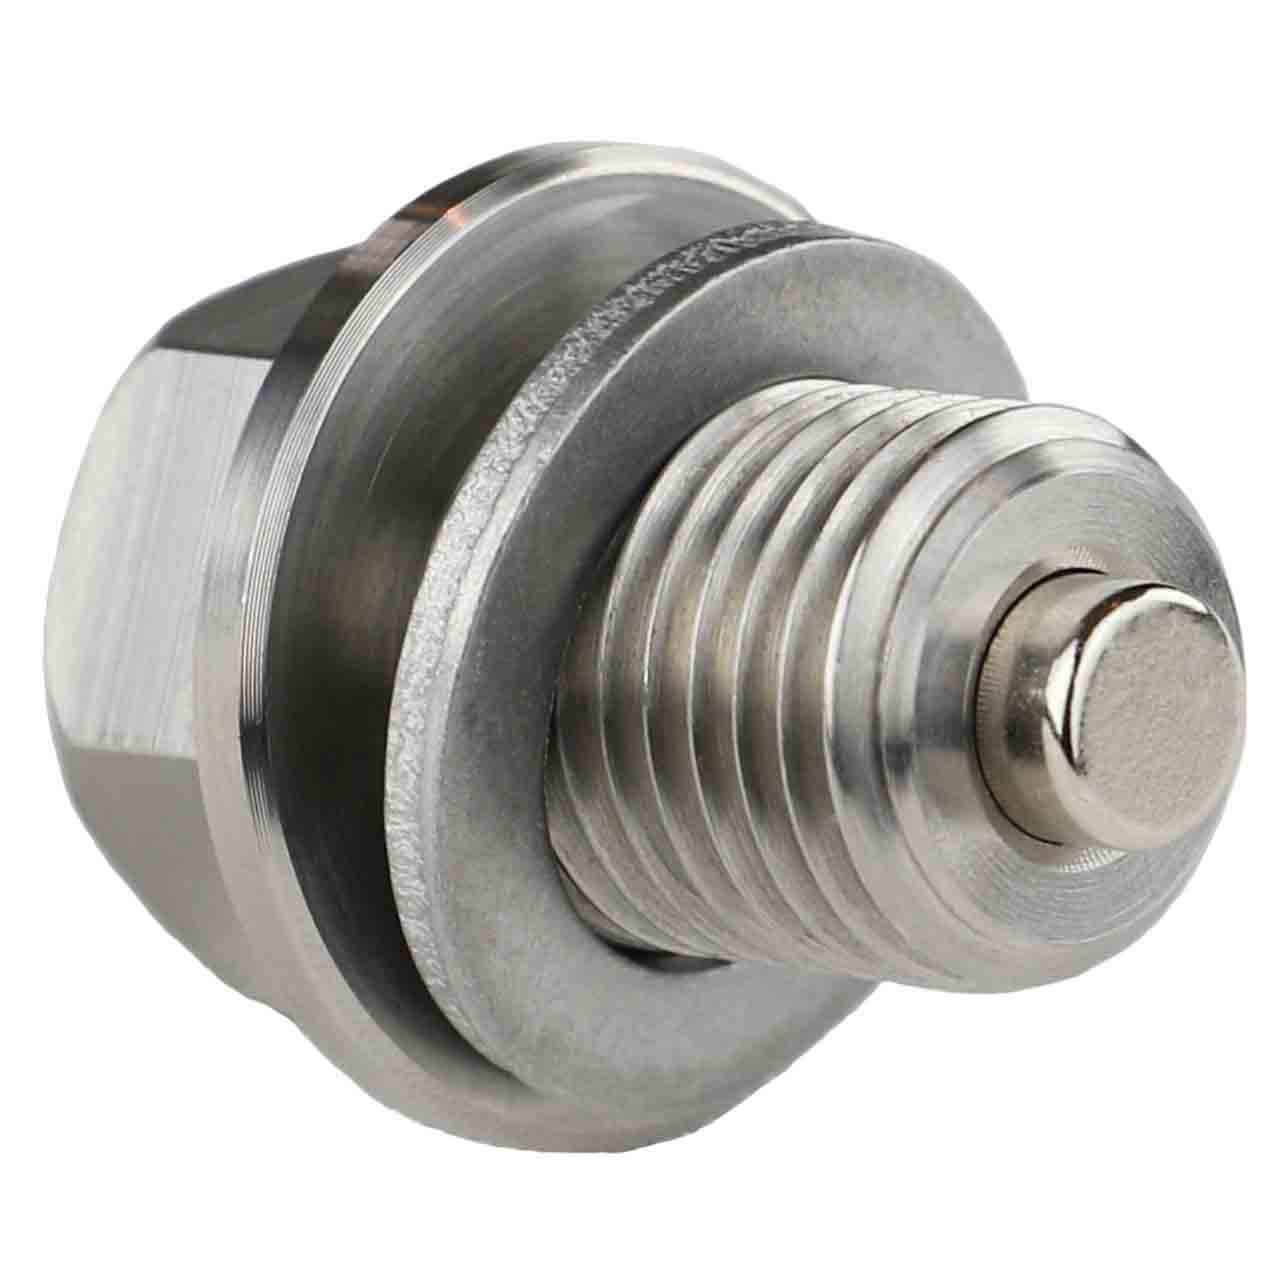 Plymouth Acclaim Magnetic Oil Drain Plug - 1989-1995 - 3.0 Liter - 6 Cylinder - Made In USA - Stainless Steel